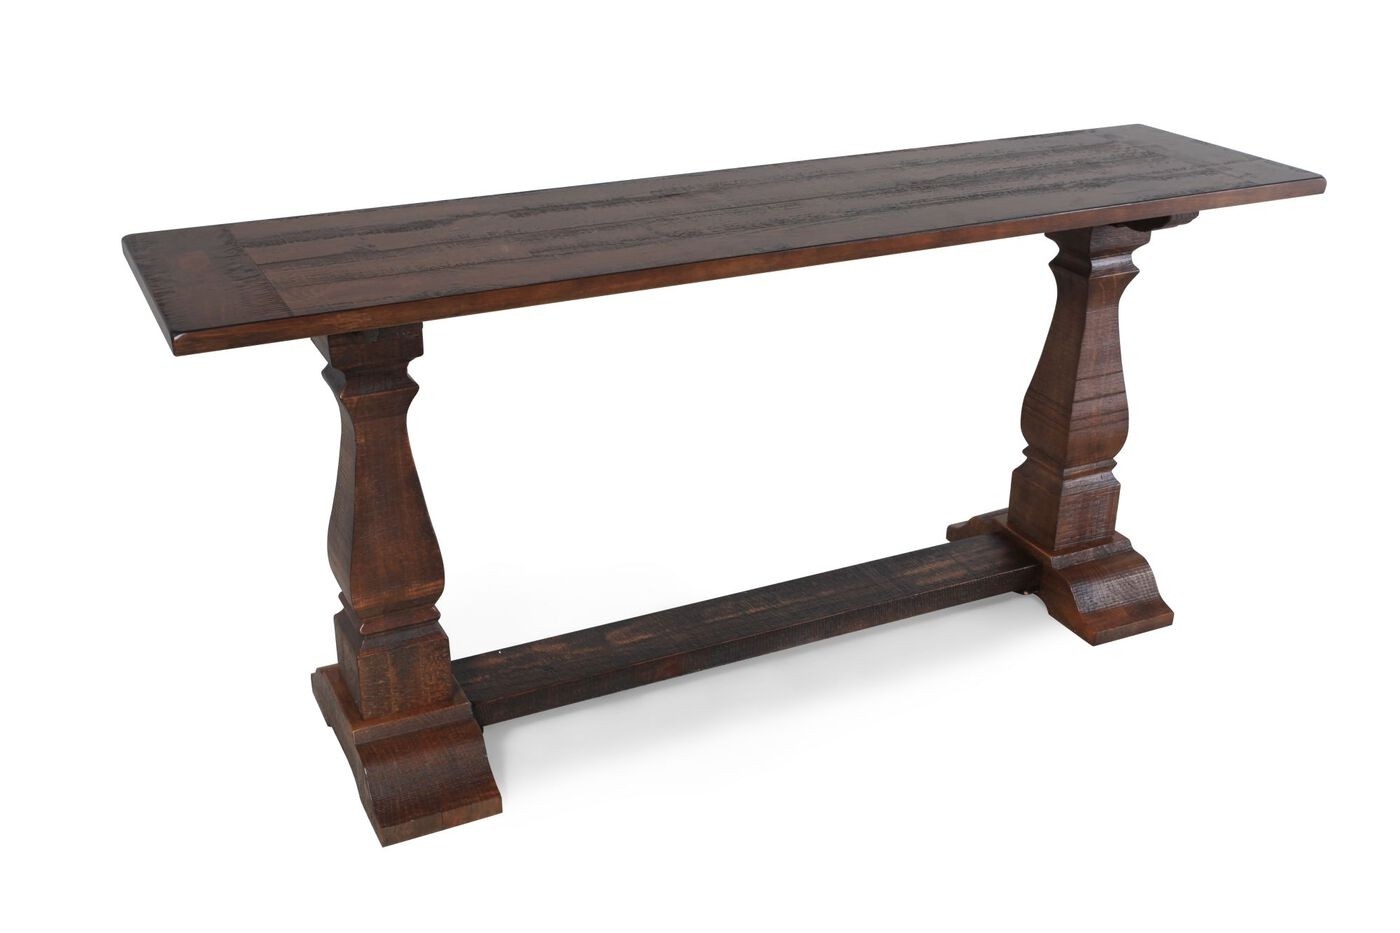 Pedestal column casual console table in burnished brown